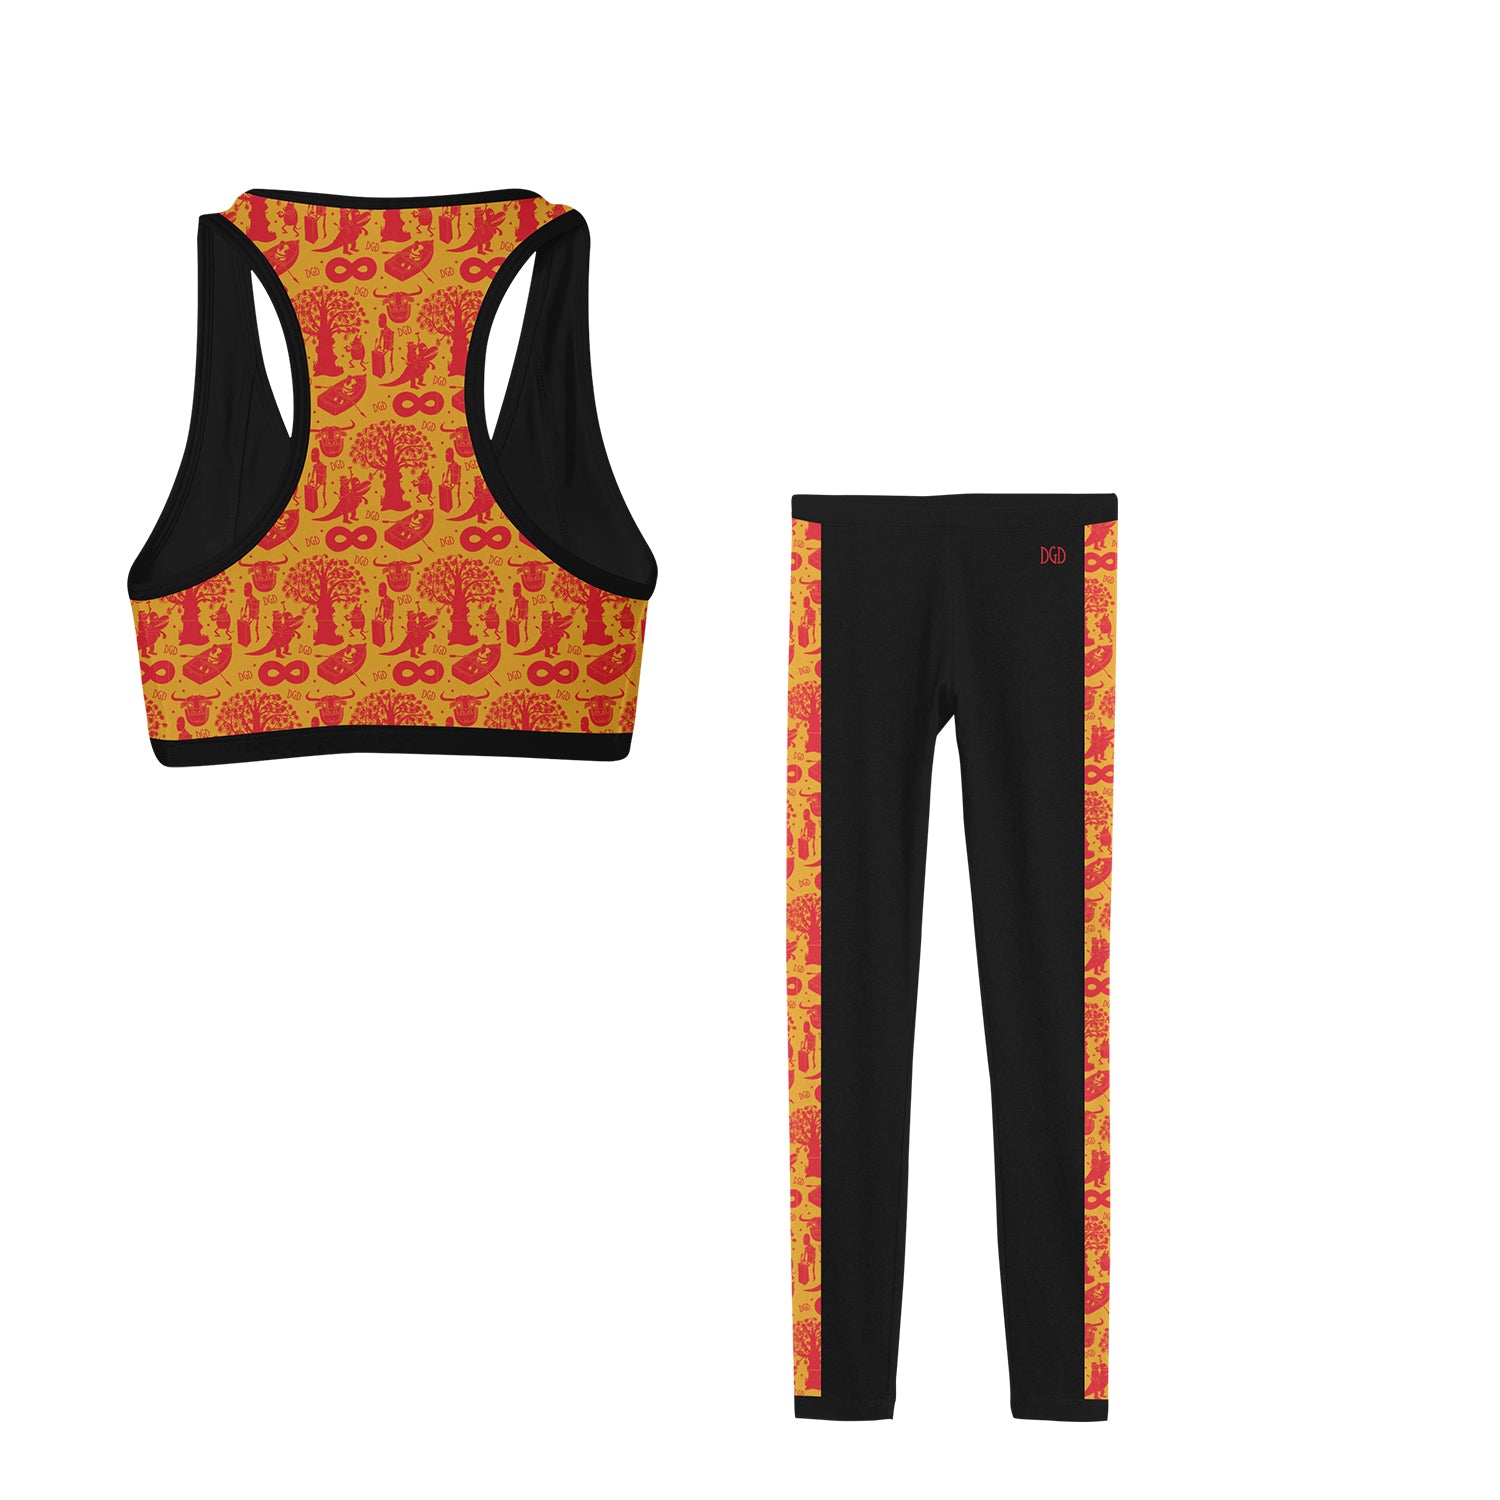 Photo of the Dance Gavin Dance Custom Workout Set on a white background.   Bra is on the left and has Orange fabric with red image icons from Dance Gavin Dance Albums as well as black border and piping.  The sweatpants are black with the same orange with red album icons running down both legs.  